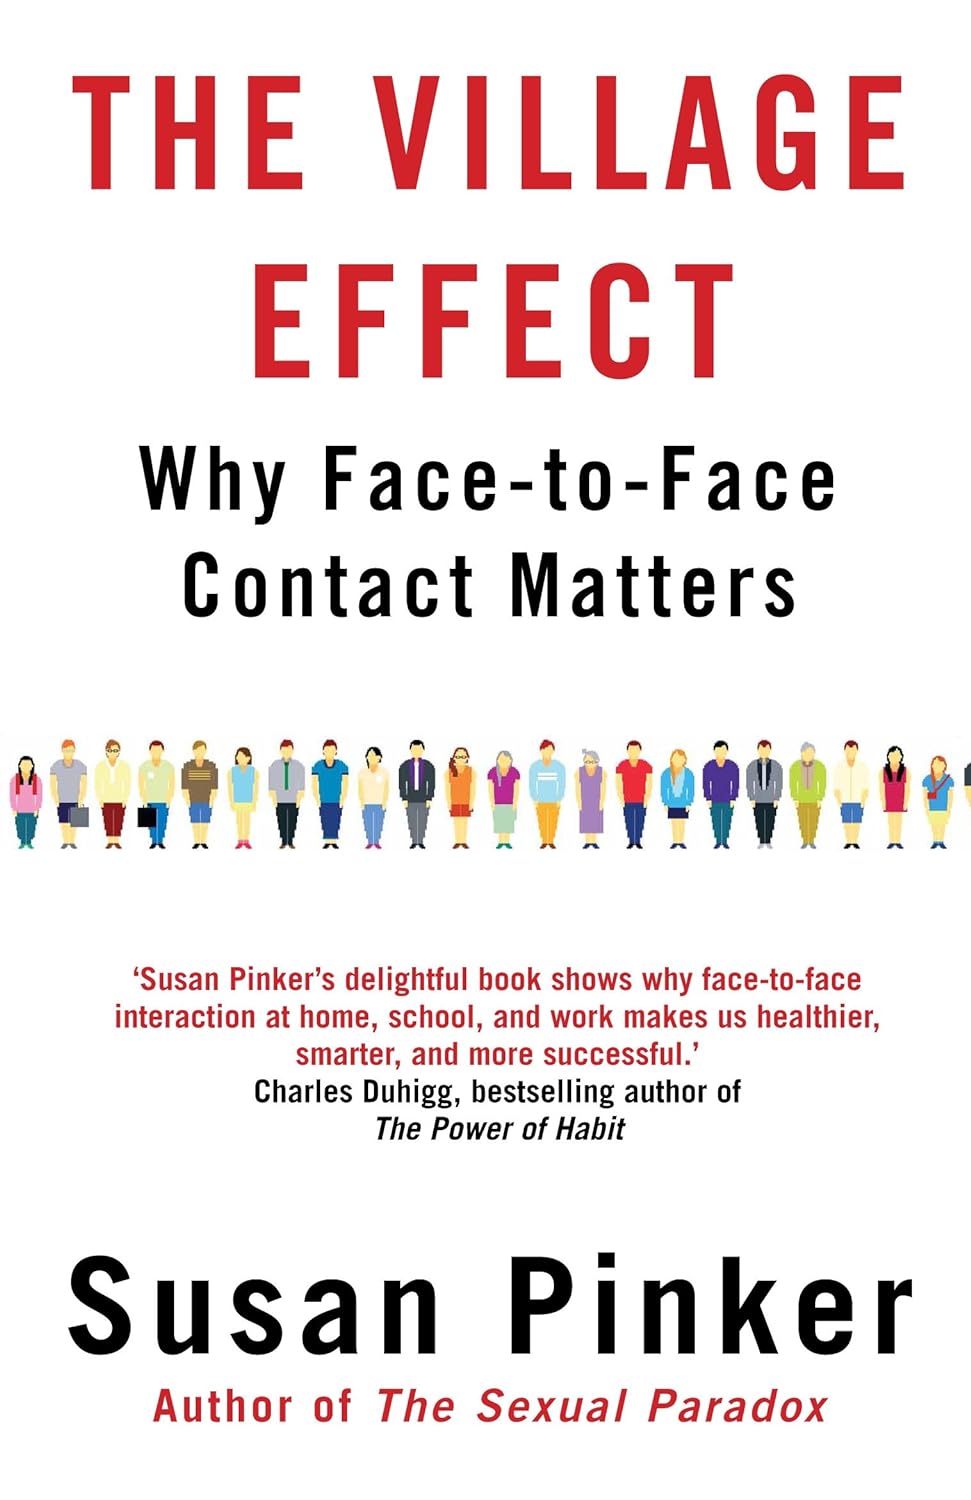 Last Chance! The Village Effect: Why Face-to-Face Contact Matters - Save 40% Now!